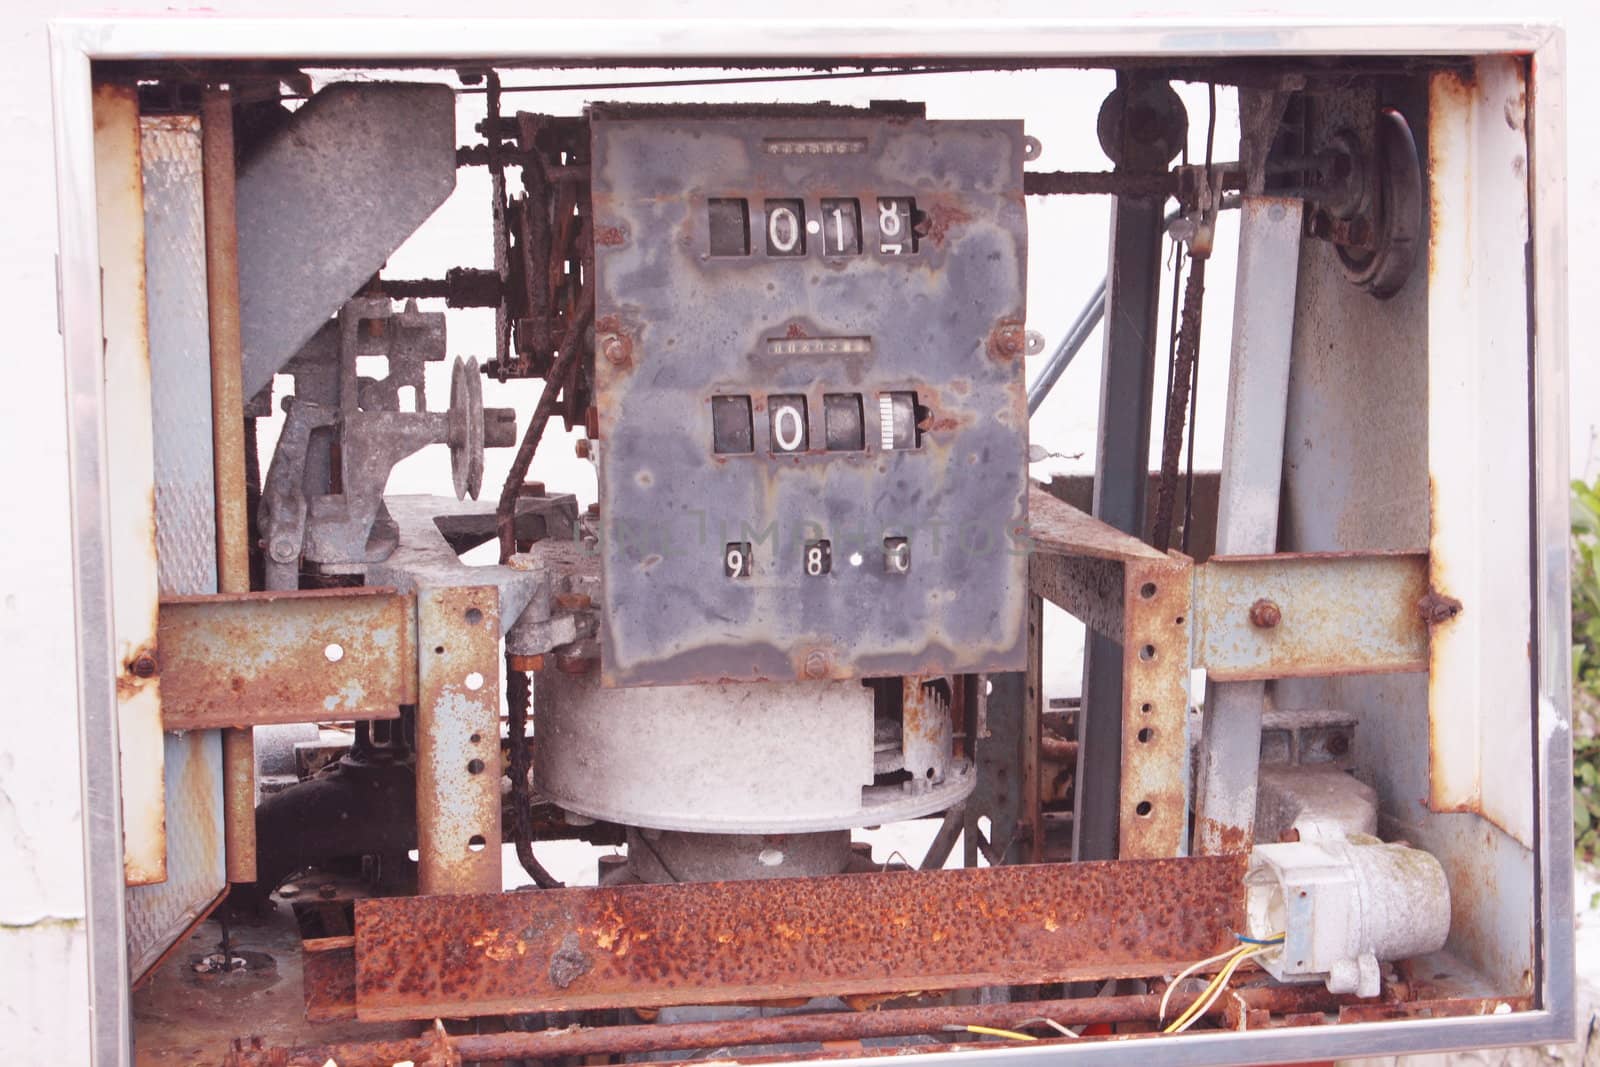 the front of an old fuel pump showing the workings